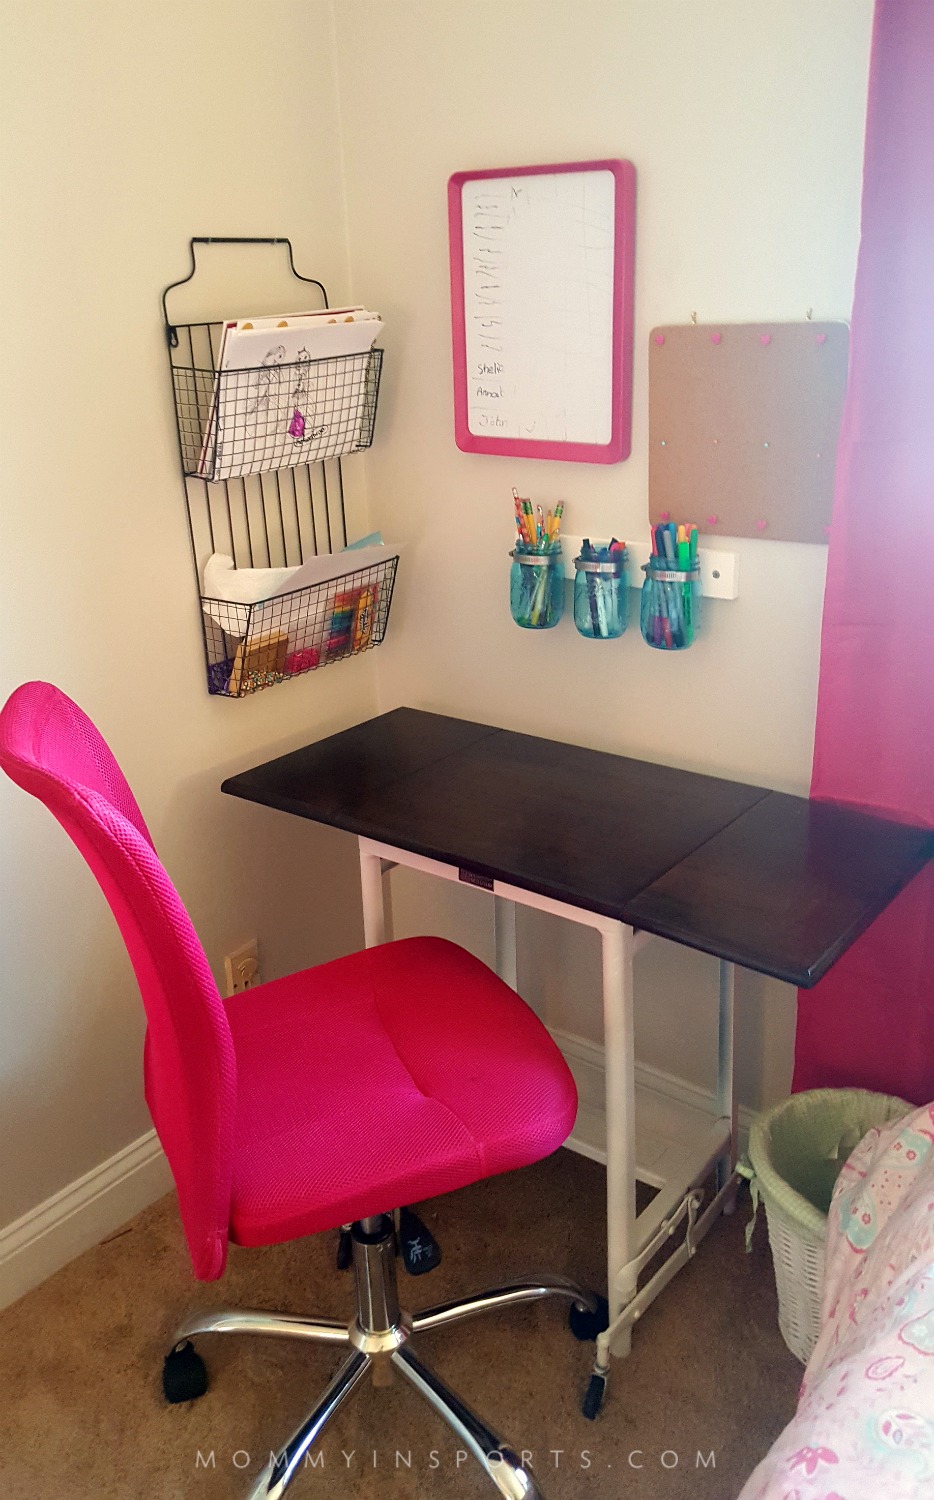 Is your daughter looking for a big girl room? Try this girl boss makeover with FREE quote printables! Perfect to inspire your budding tween!